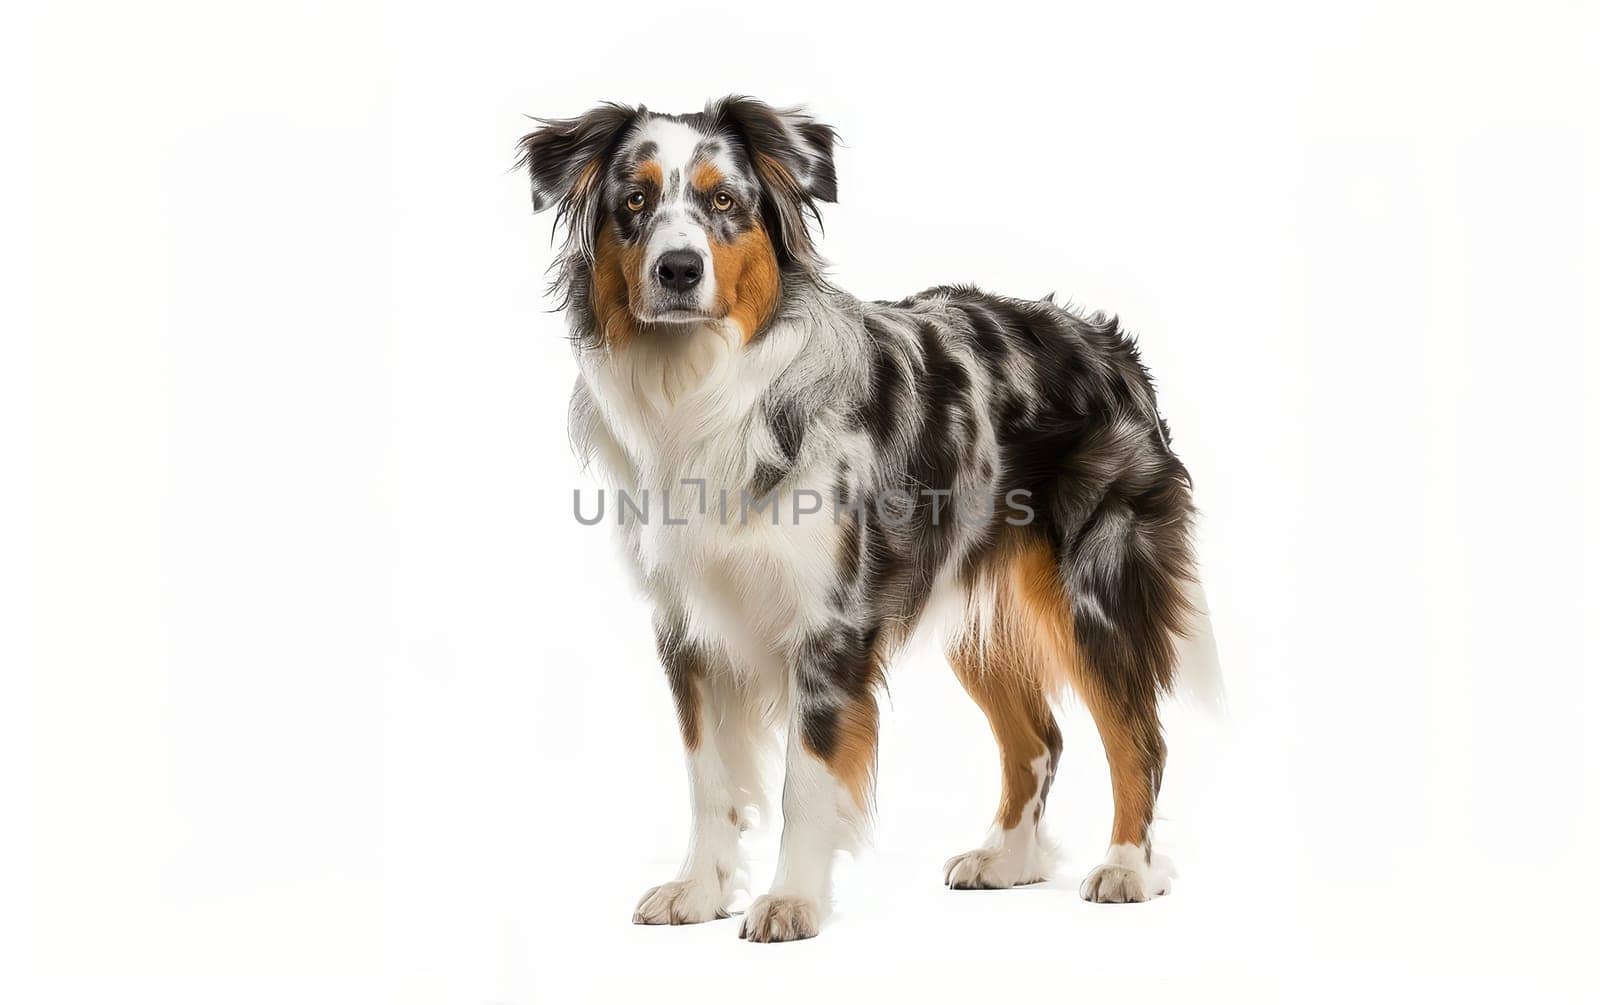 A majestic Australian Shepherd stands poised, its merle coat and attentive eyes indicative of its alert and active nature. The dog's stance displays confidence and readiness. by sfinks